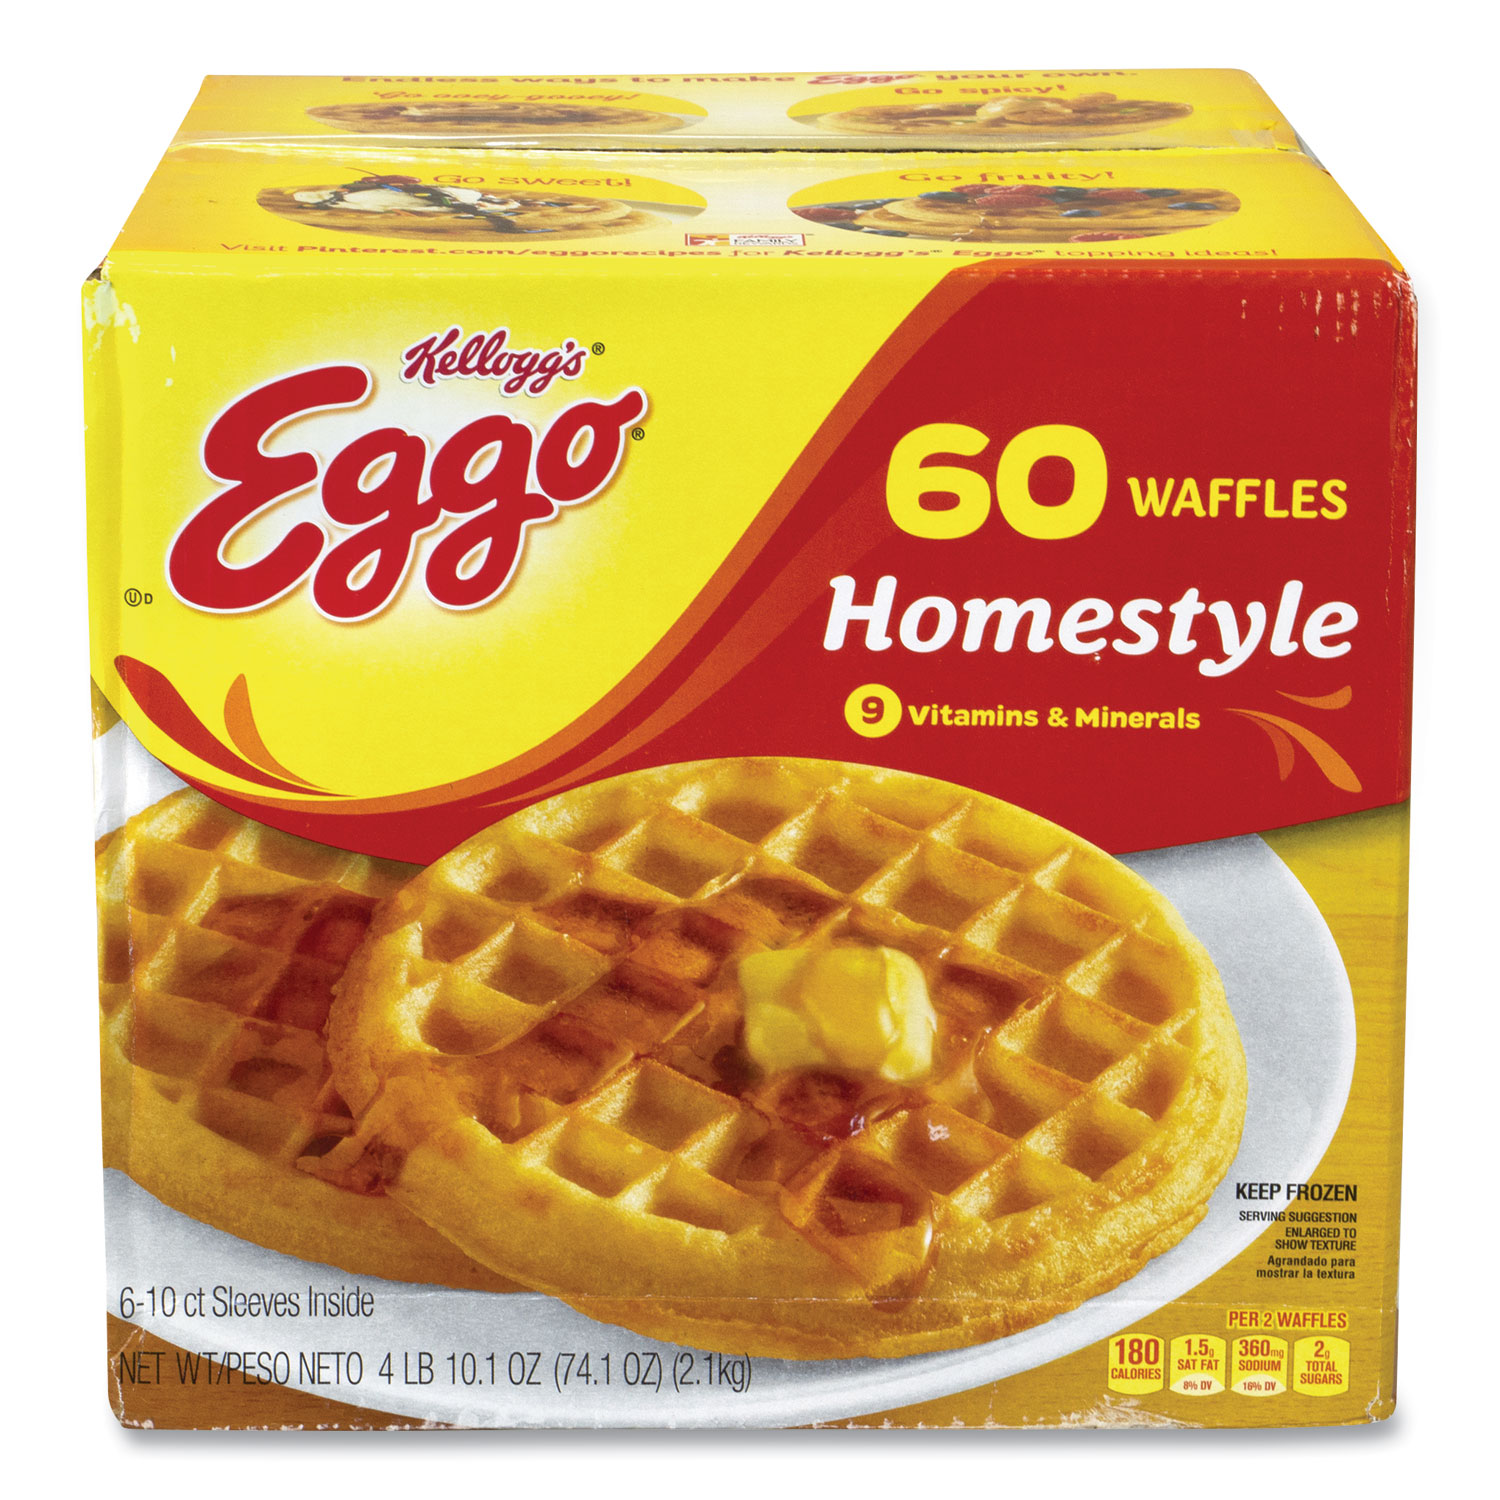  Kellogg's 94064 Eggo Homestyle Waffles, 74.1 oz Box, 10 Waffles/Sleeve, 6 Sleeves/Box, Free Delivery in 1-4 Business Days (GRR90300016) 